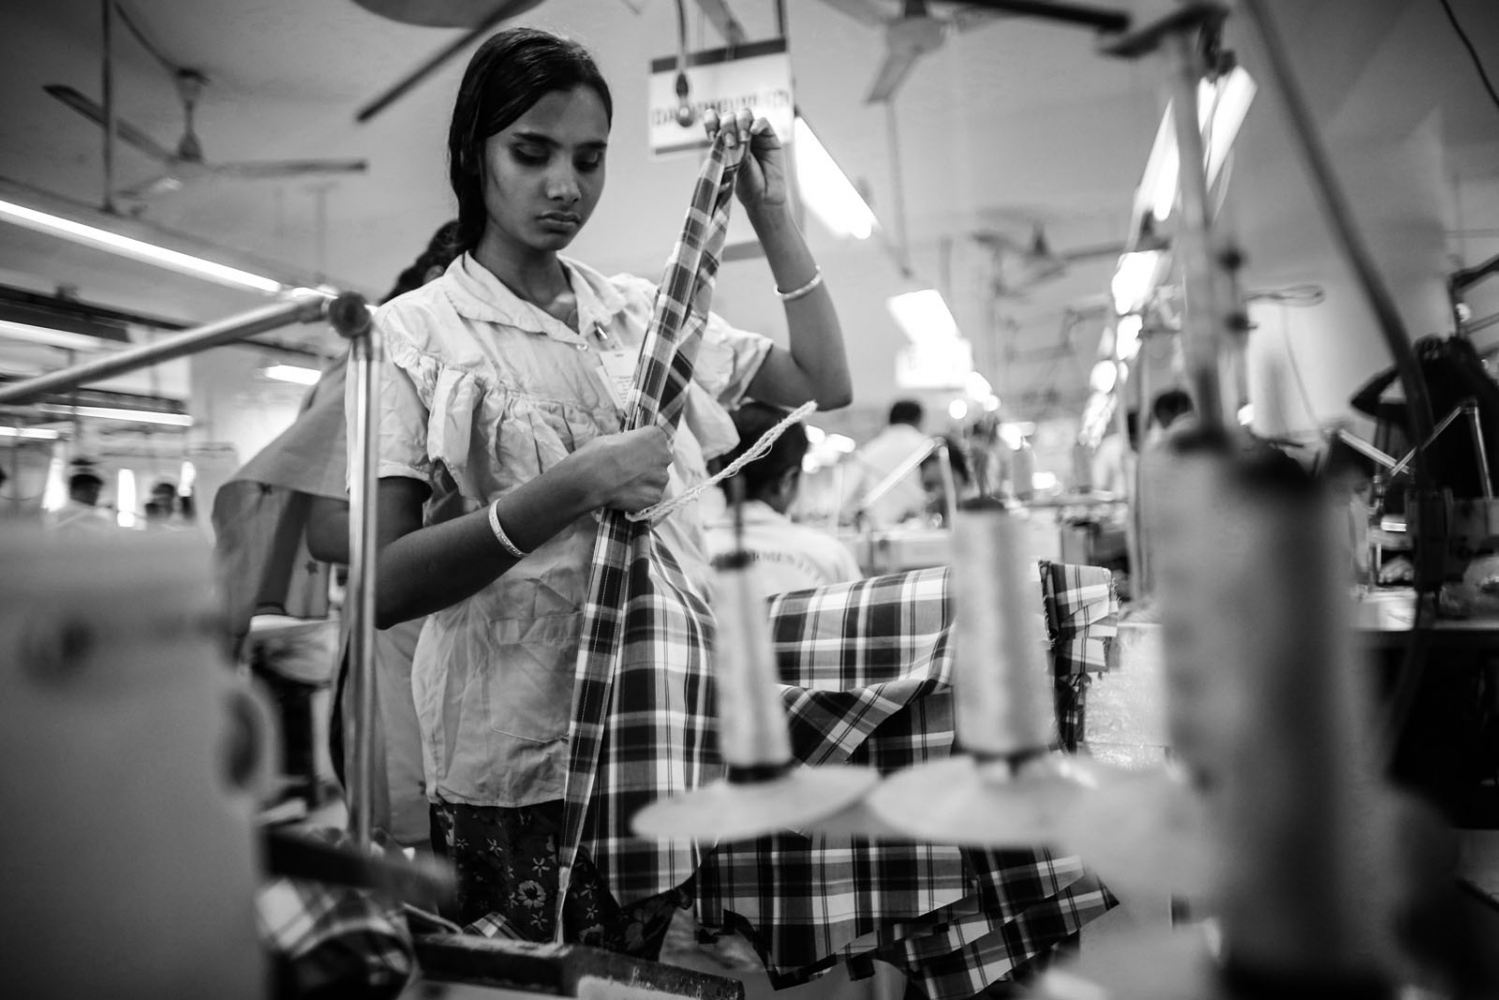  Workers sort clothes at a garment factory in Savar. The April 24 collapse of the Rana Plaza...